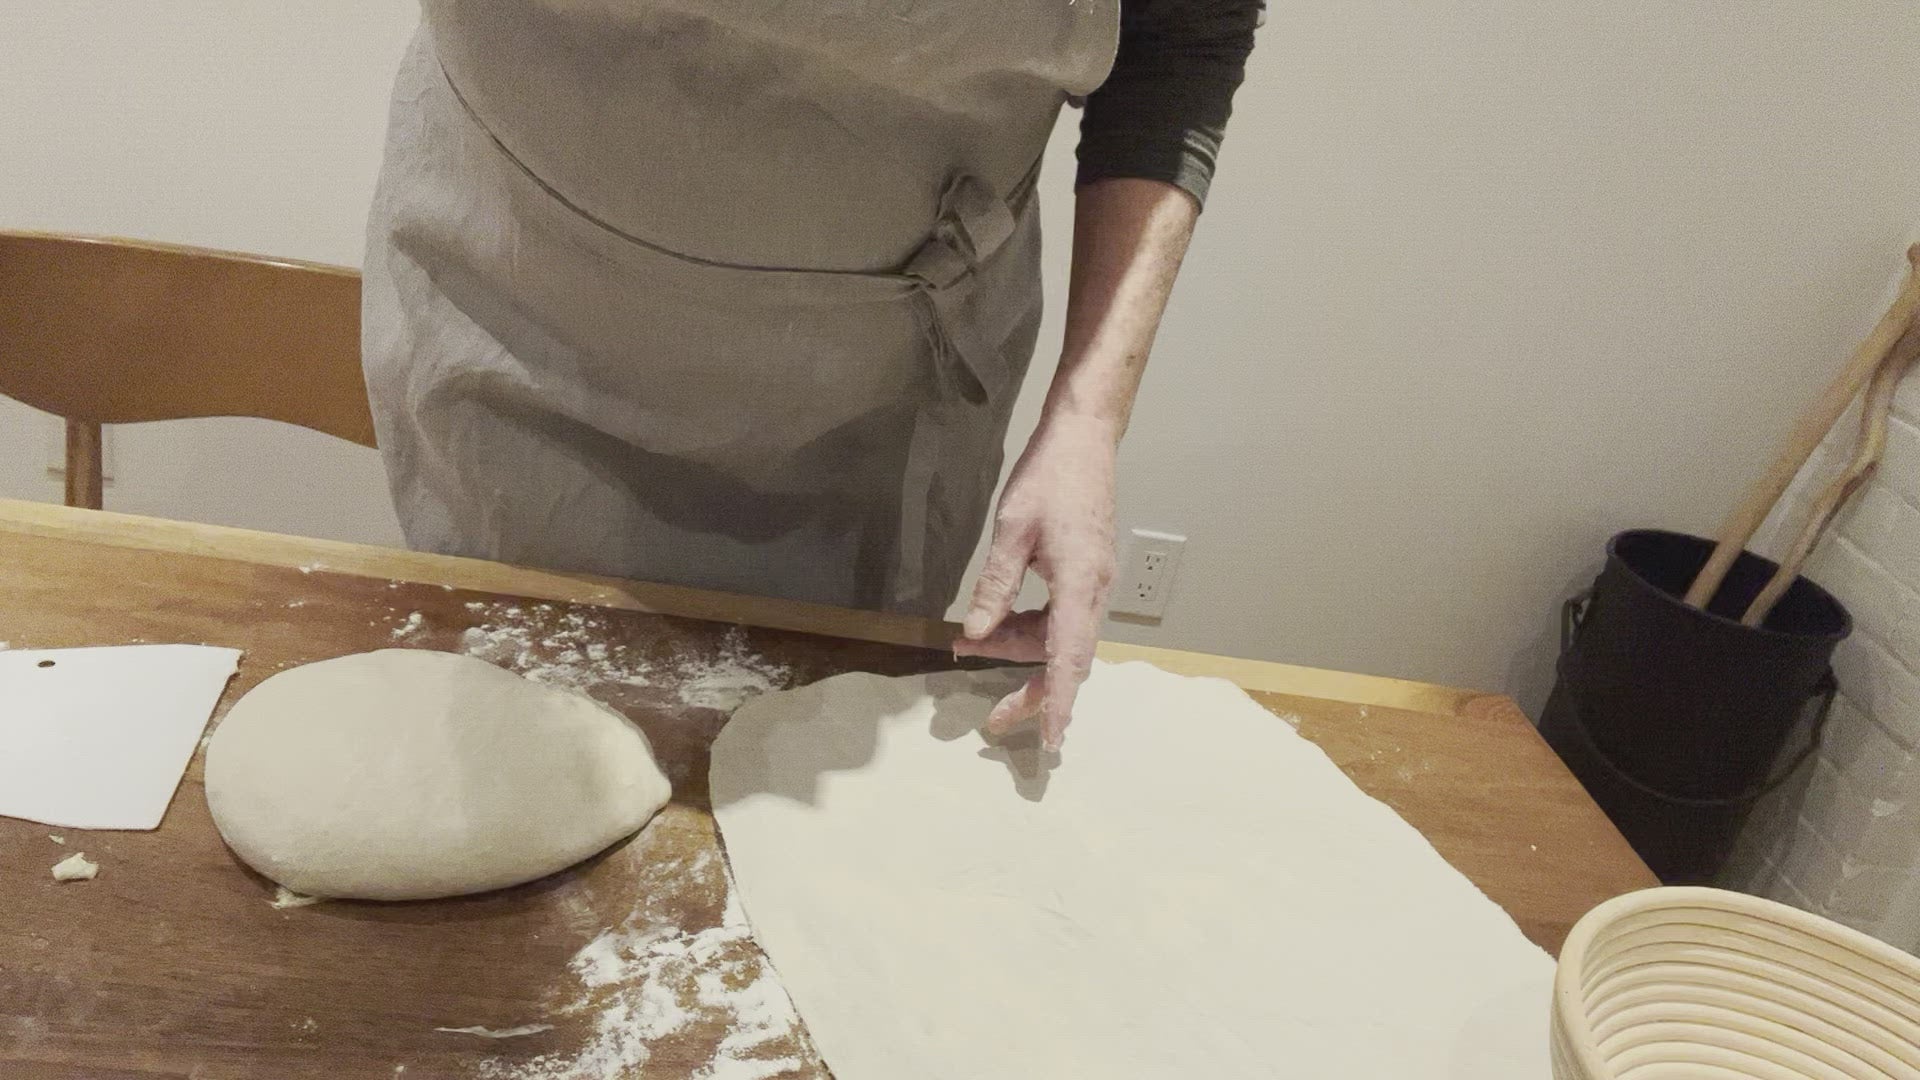 Kim is shaping dough, setting it in the bannekin then placing it into the banneton. Simple, easy to use and easier to clean than a traditional banneton liner with seams and elastic.